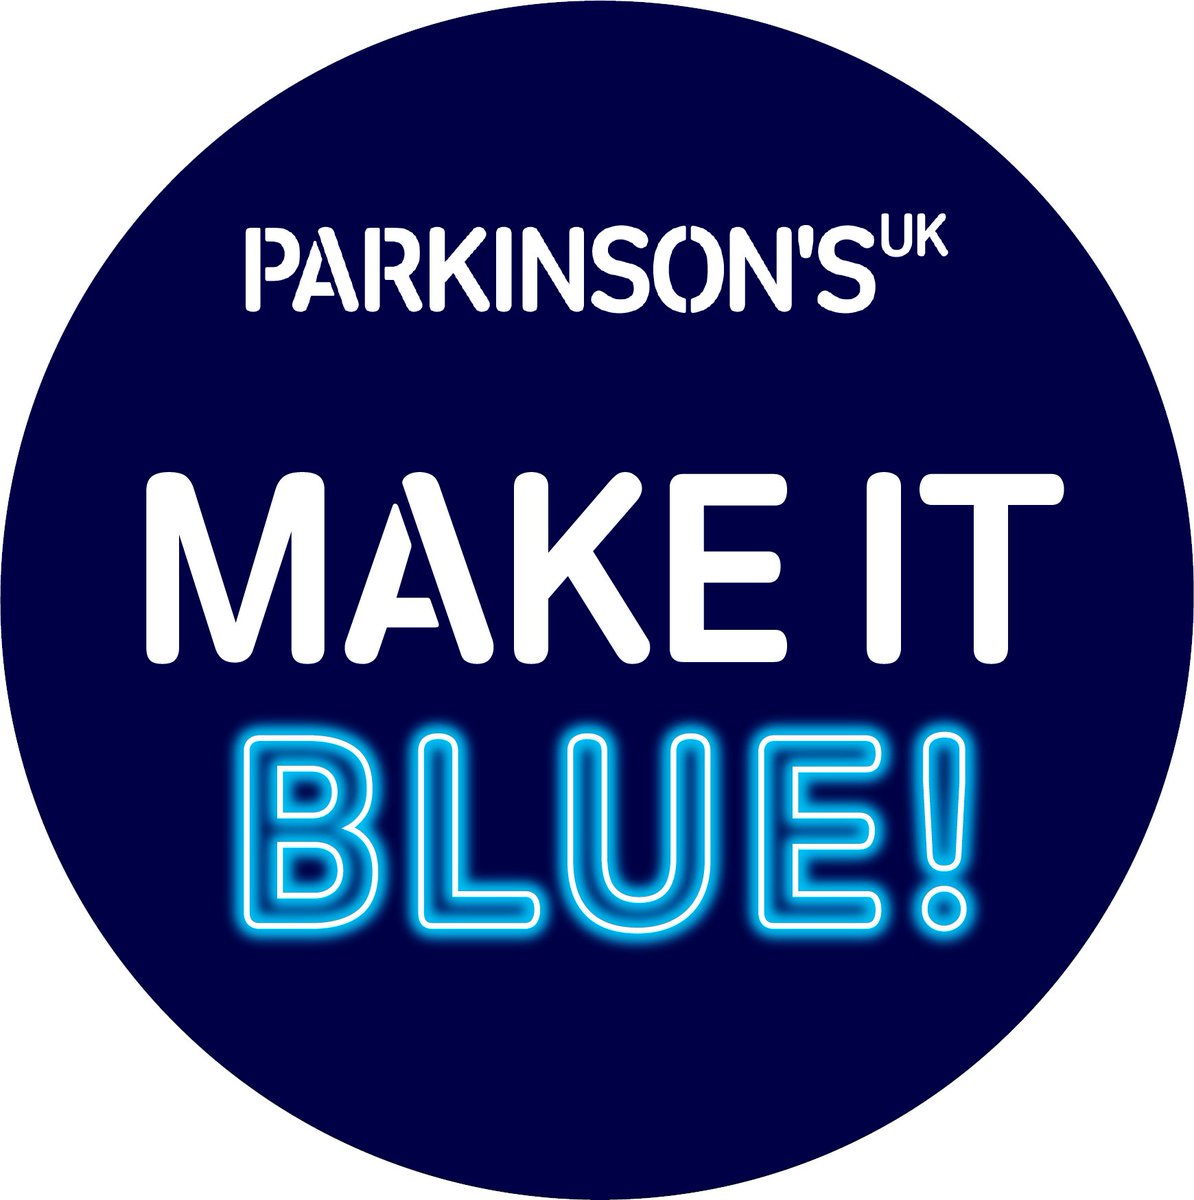 This #WorldParkinsonsDay reach out and talk to someone who understands if you or someone you love is affected by the condition. Information and support will be shared across social media today - look out for the hashtag #makeitblue💙